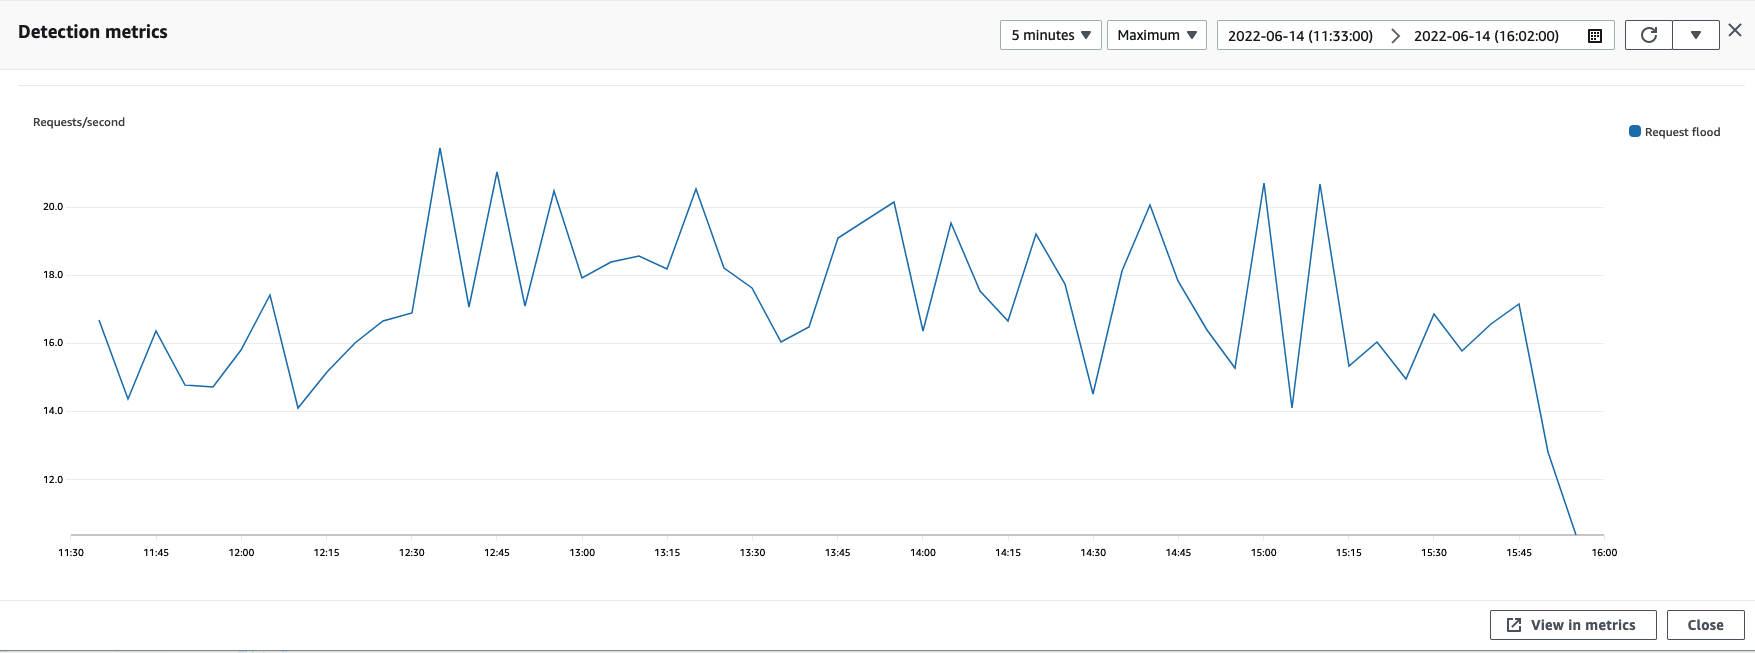 A detection metrics graph shows detection of request flood traffic from 11:30 until it subsides at 16:00.